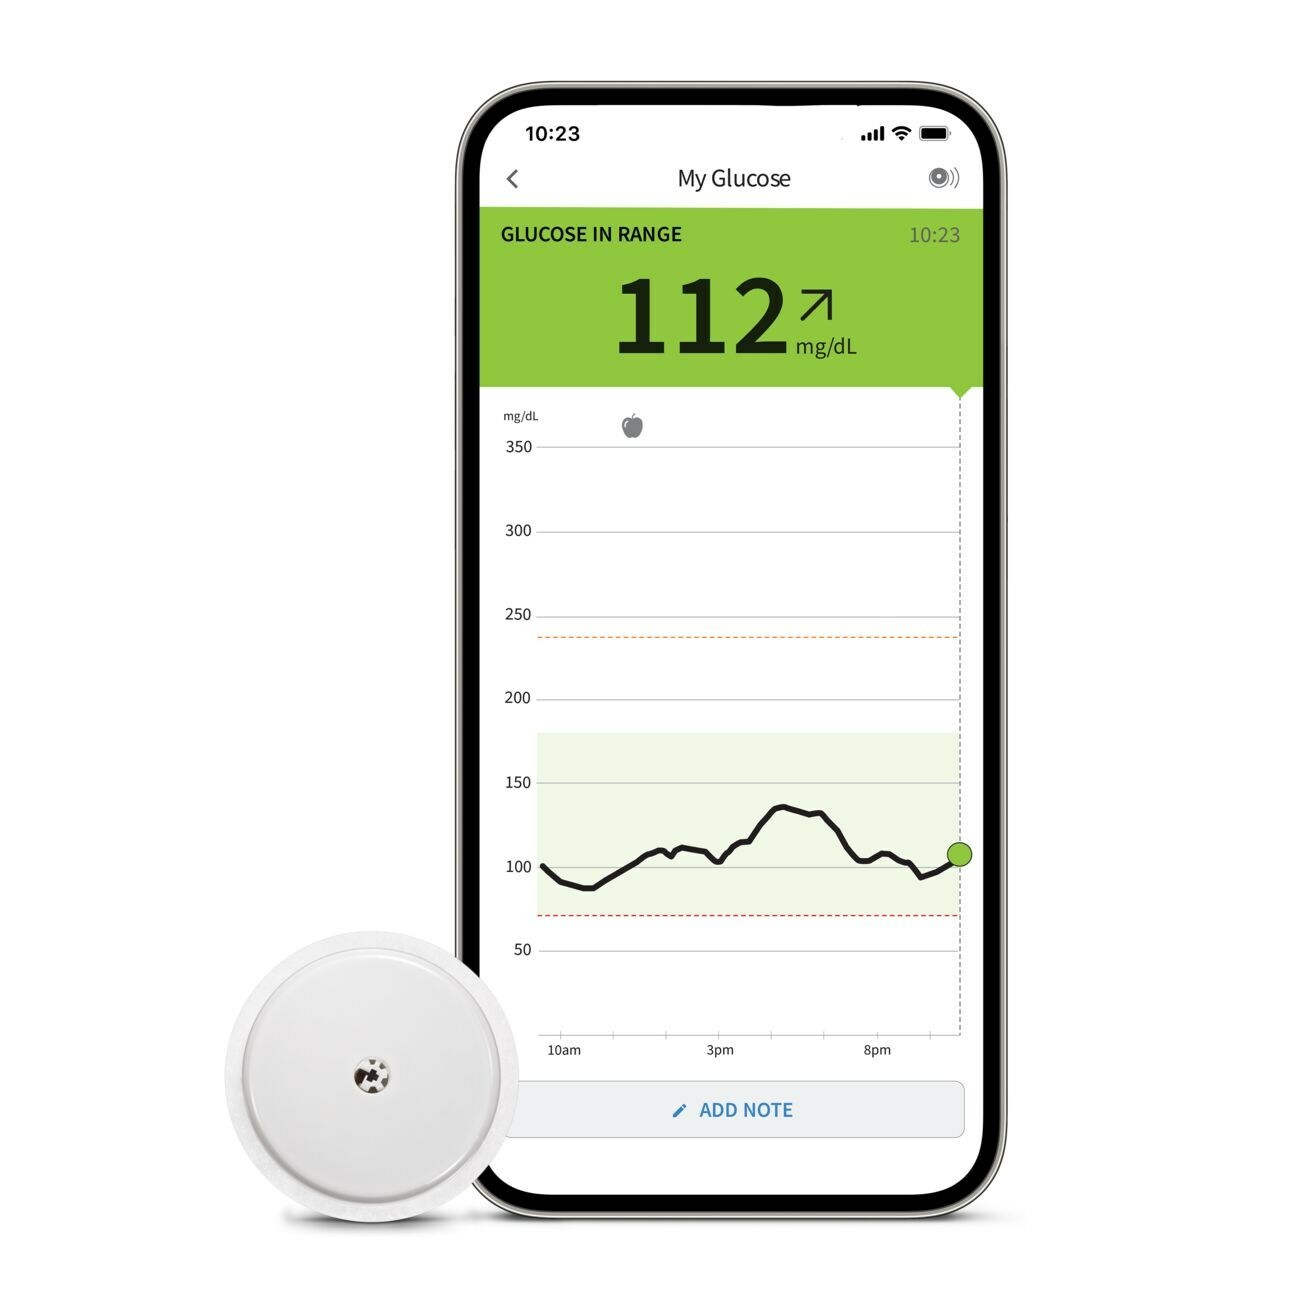 U.S. FDA Clears Abbott's FreeStyle Libre® 2 and FreeStyle Libre® 3 Sensors  for Integration with Automated Insulin Delivery Systems - Mar 6, 2023